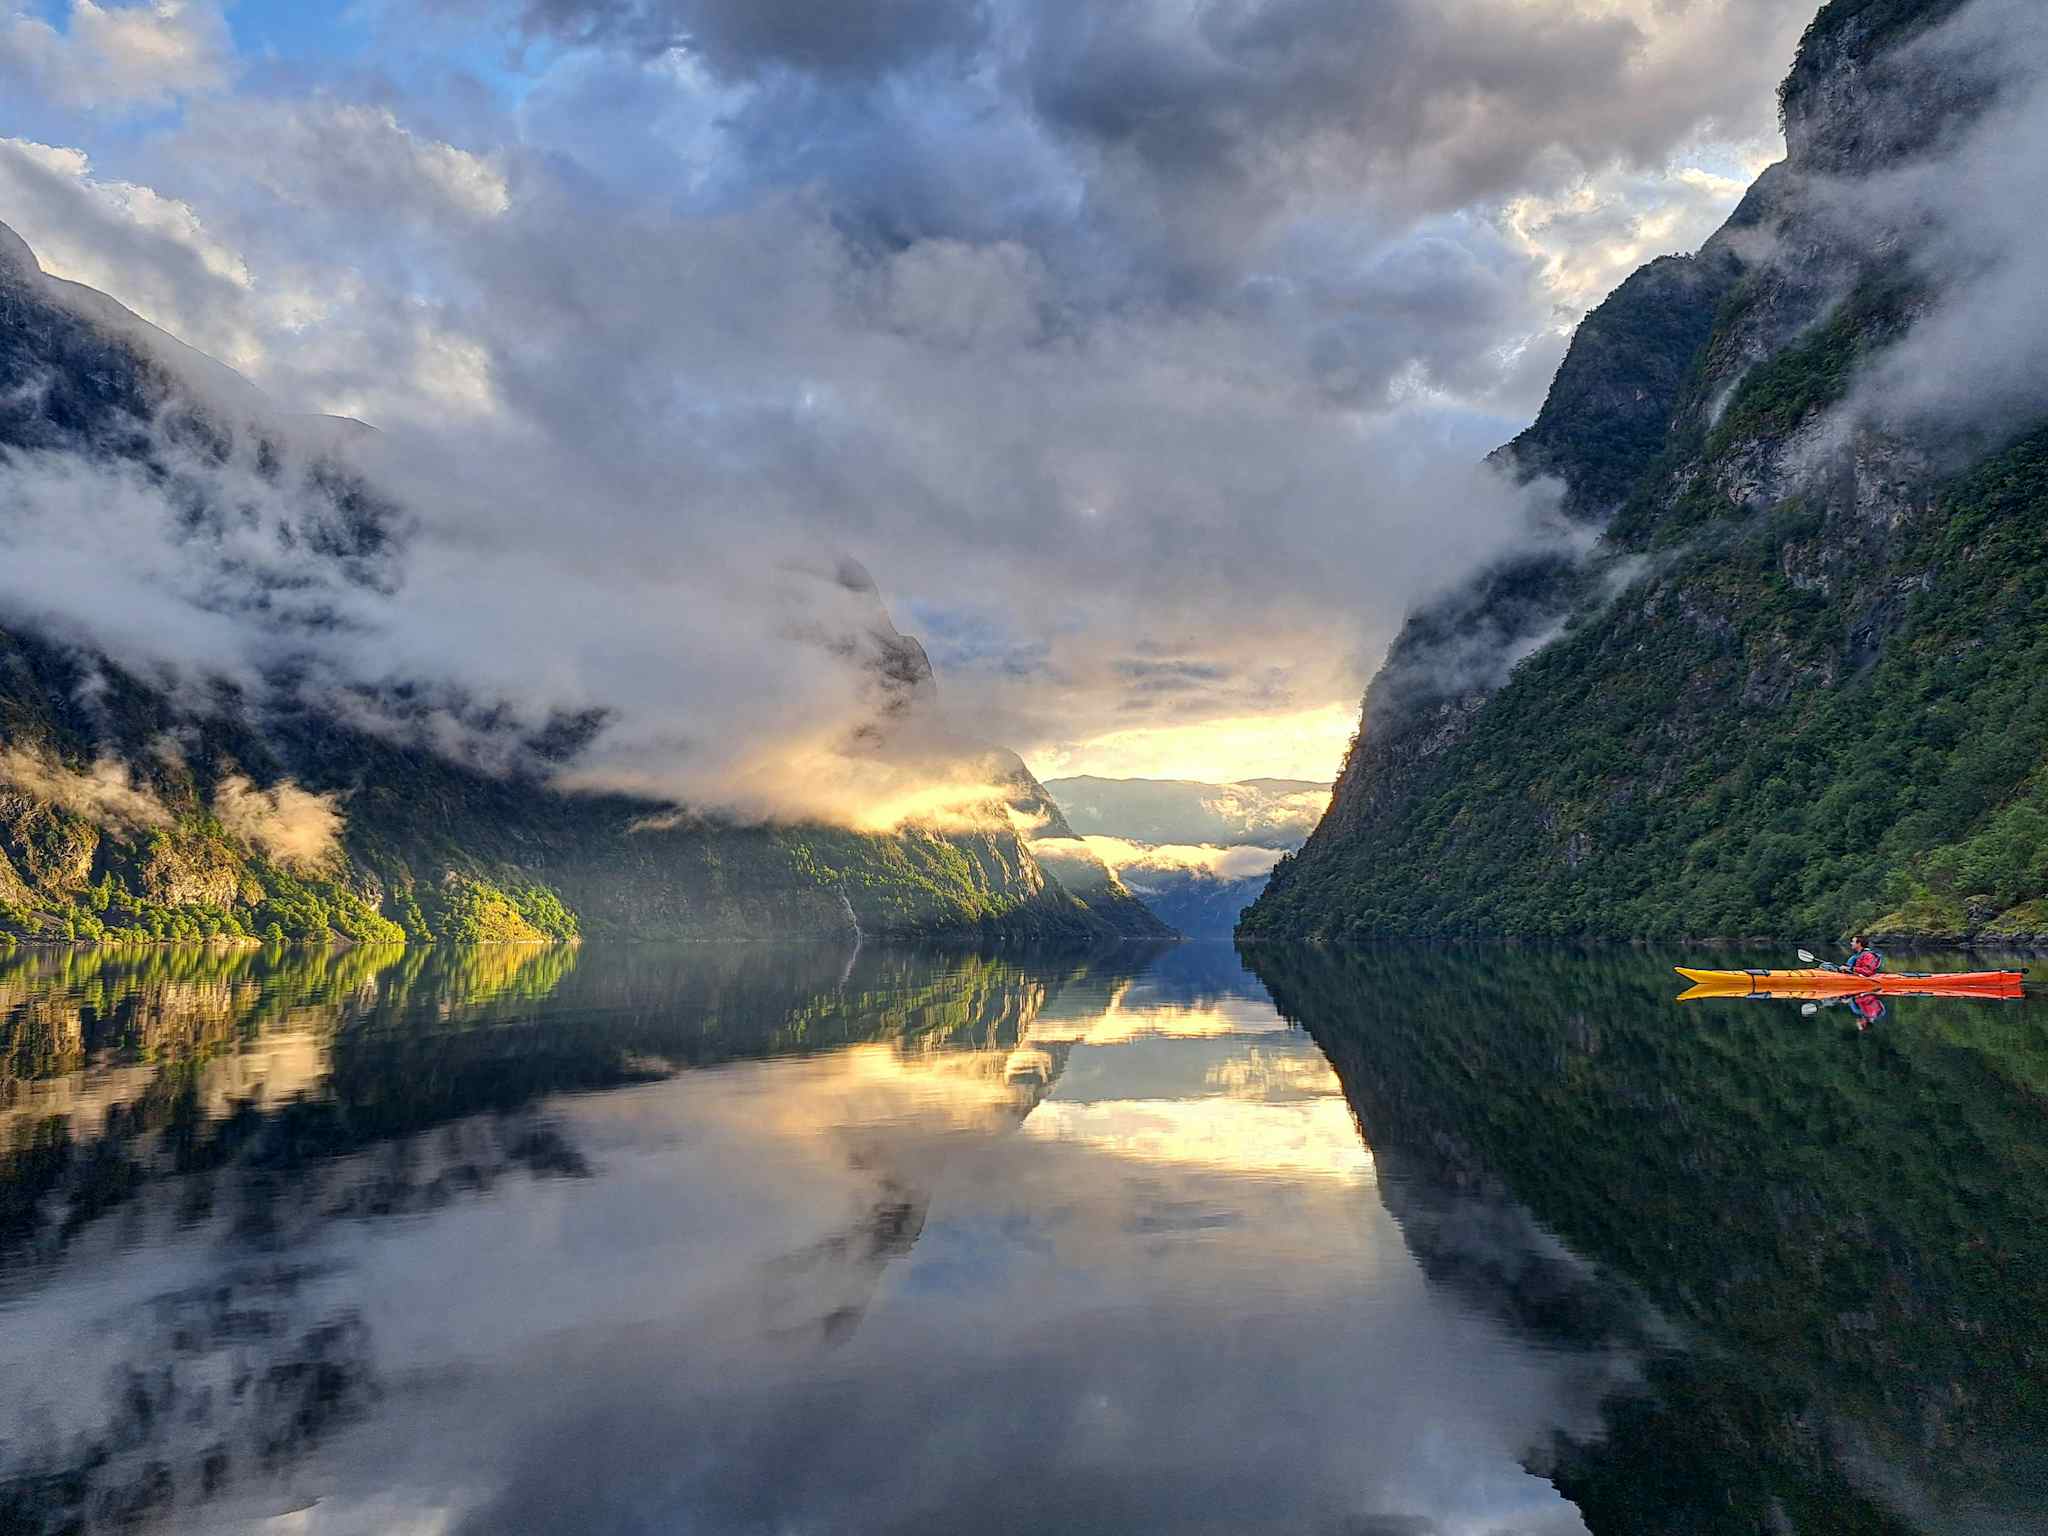 Amazing view from the waters of the Naeroyfjord in the Norwegian Fjords at dawn.